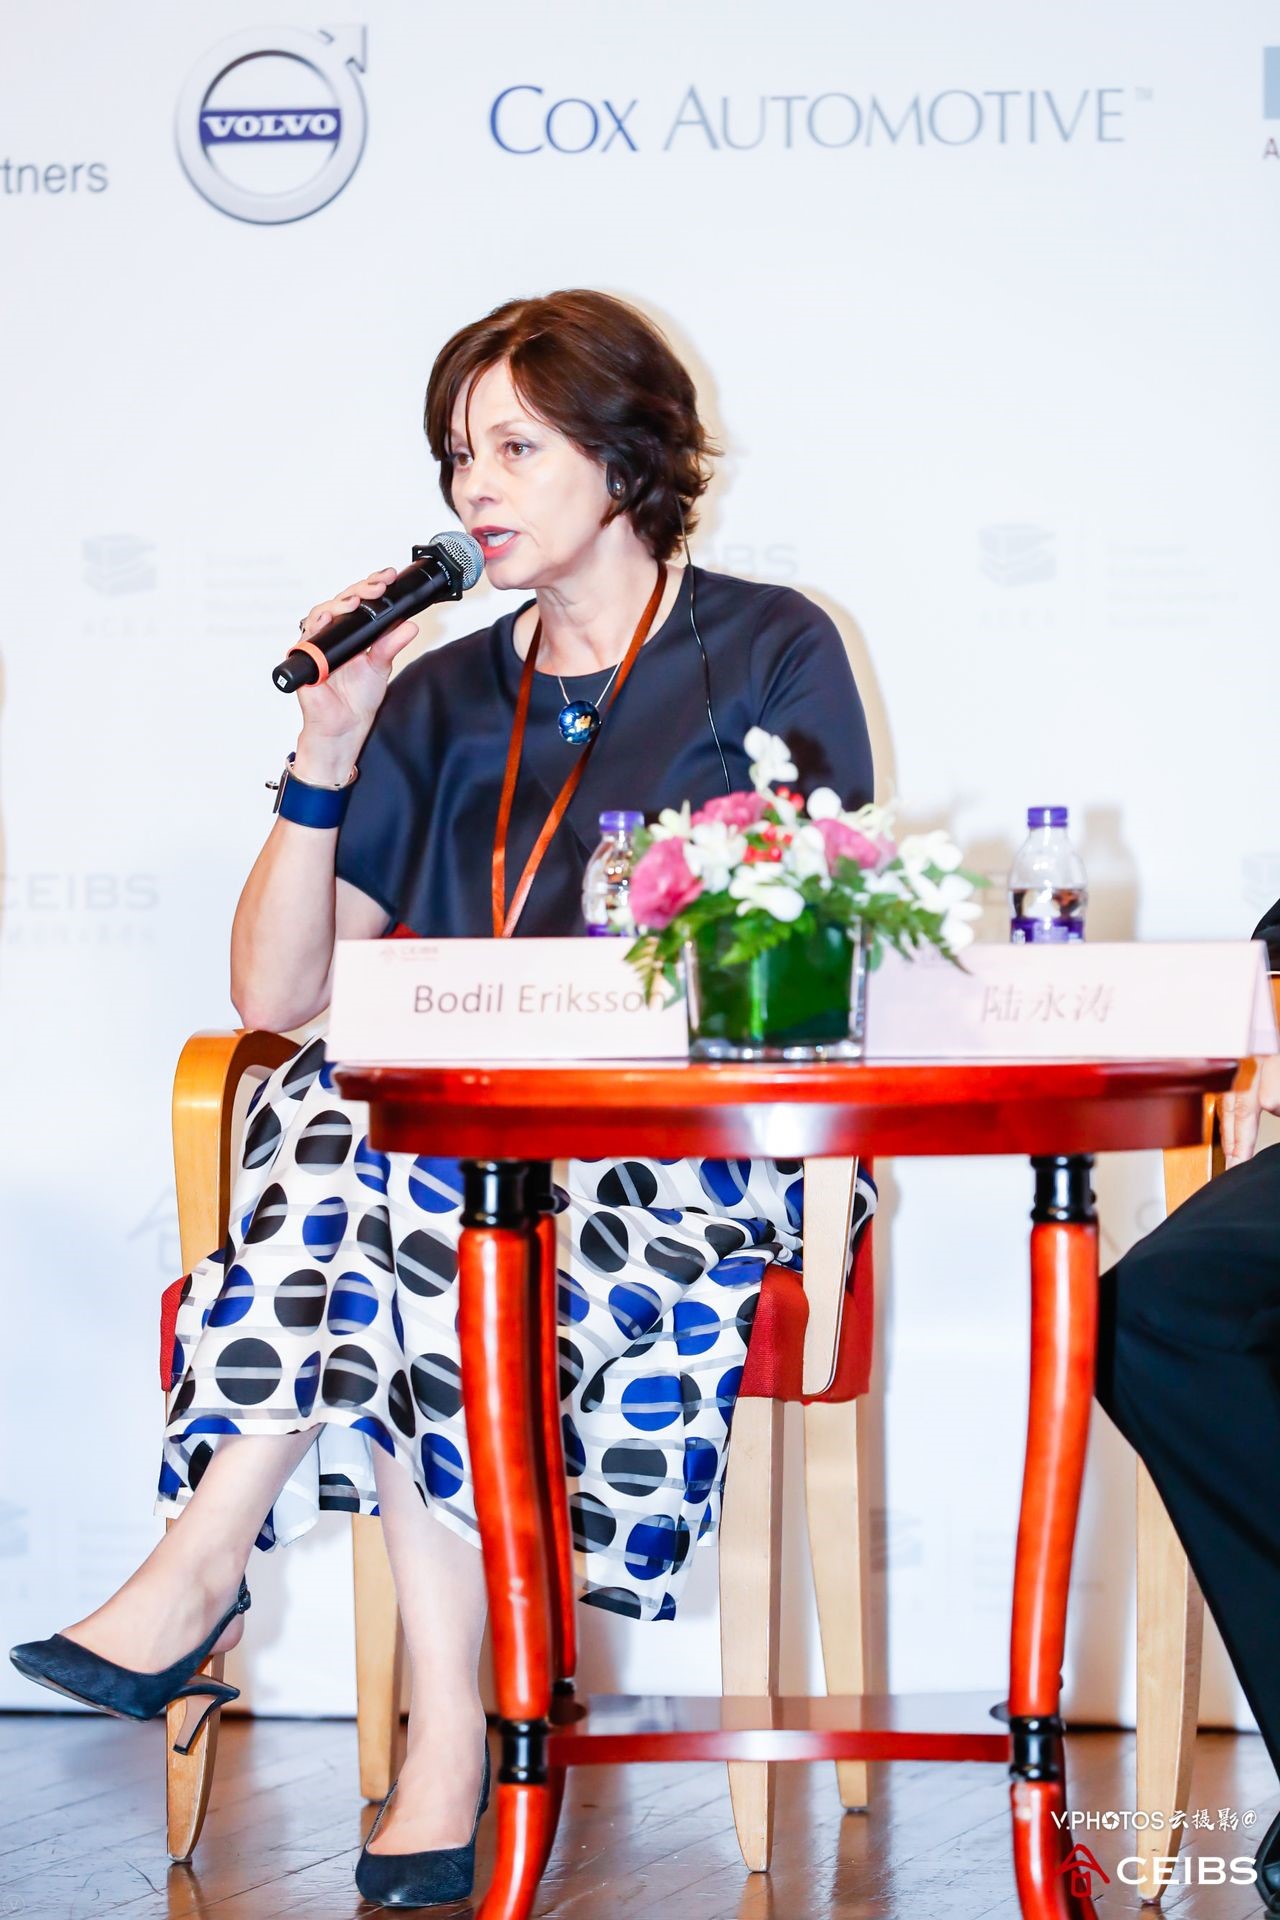 Ms. Bodil Eriksson, Chief Executive Officer, Volvo Cars Mobility at the 15th CEIBS China Automotive Industry Forum